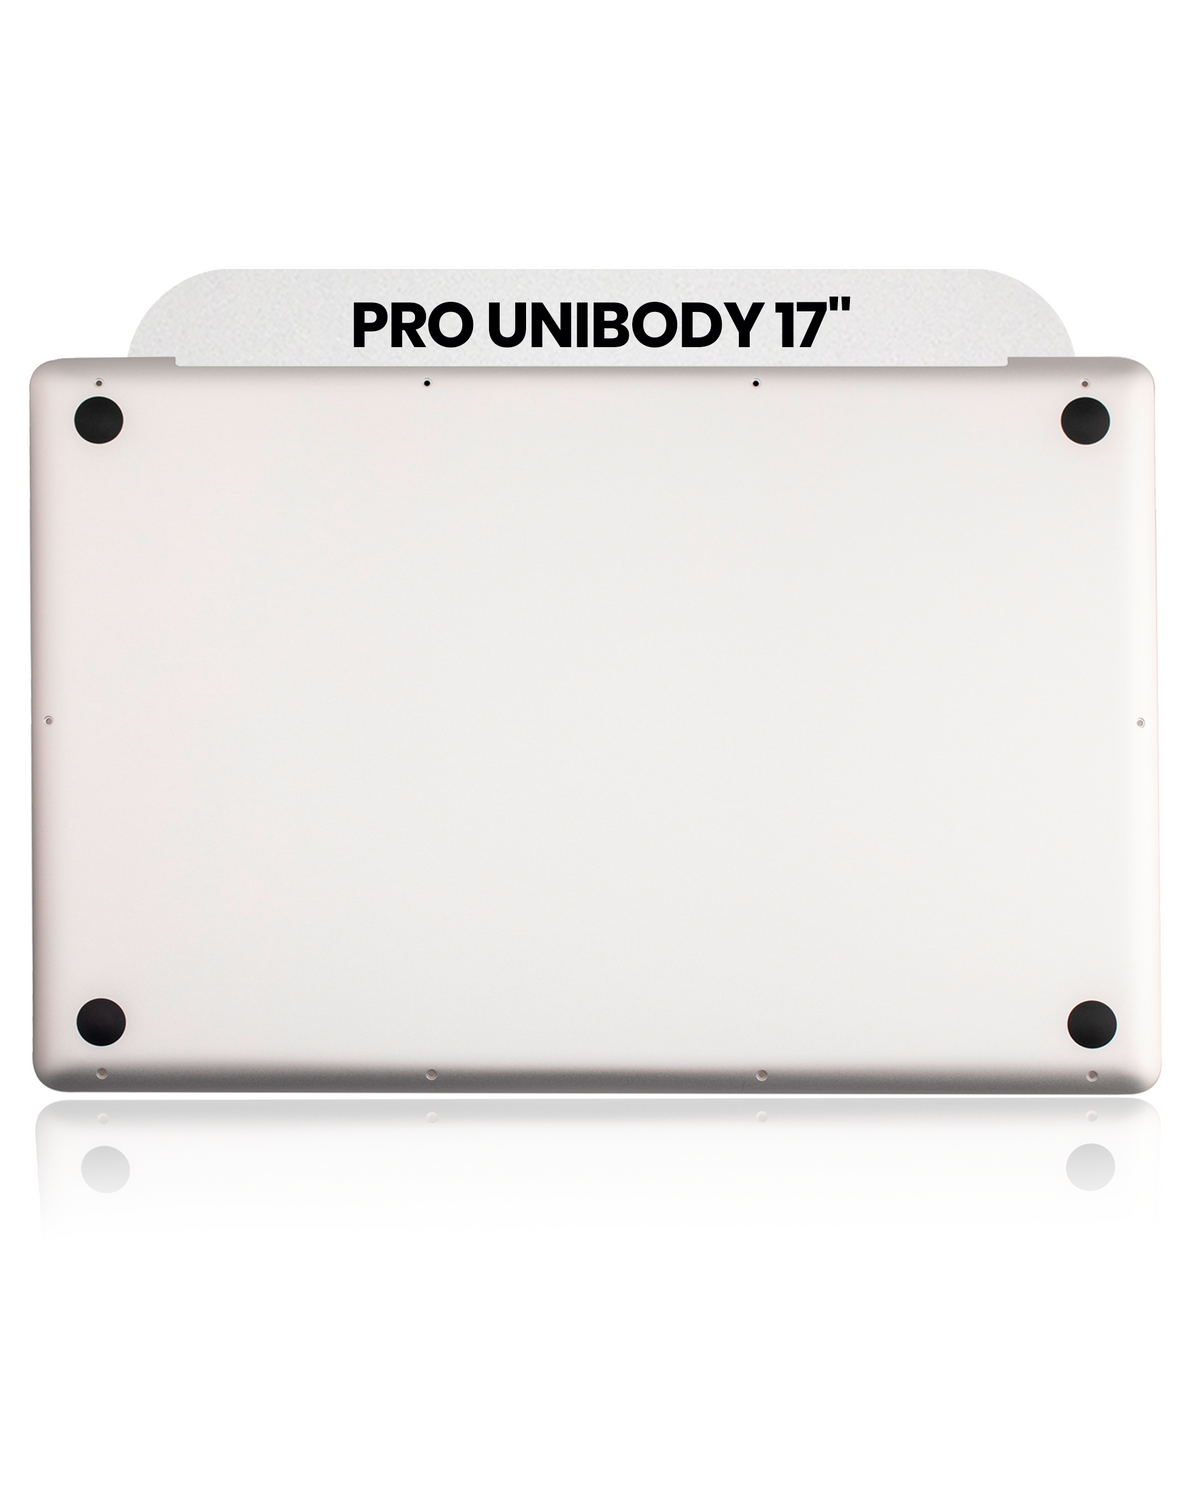 BOTTOM CASE  FOR MACBOOK PRO UNIBODY 17" A1297  (EARLY 2009 / EARLY 2011 / MID 2009 / MID 2010 / LATE 2011)